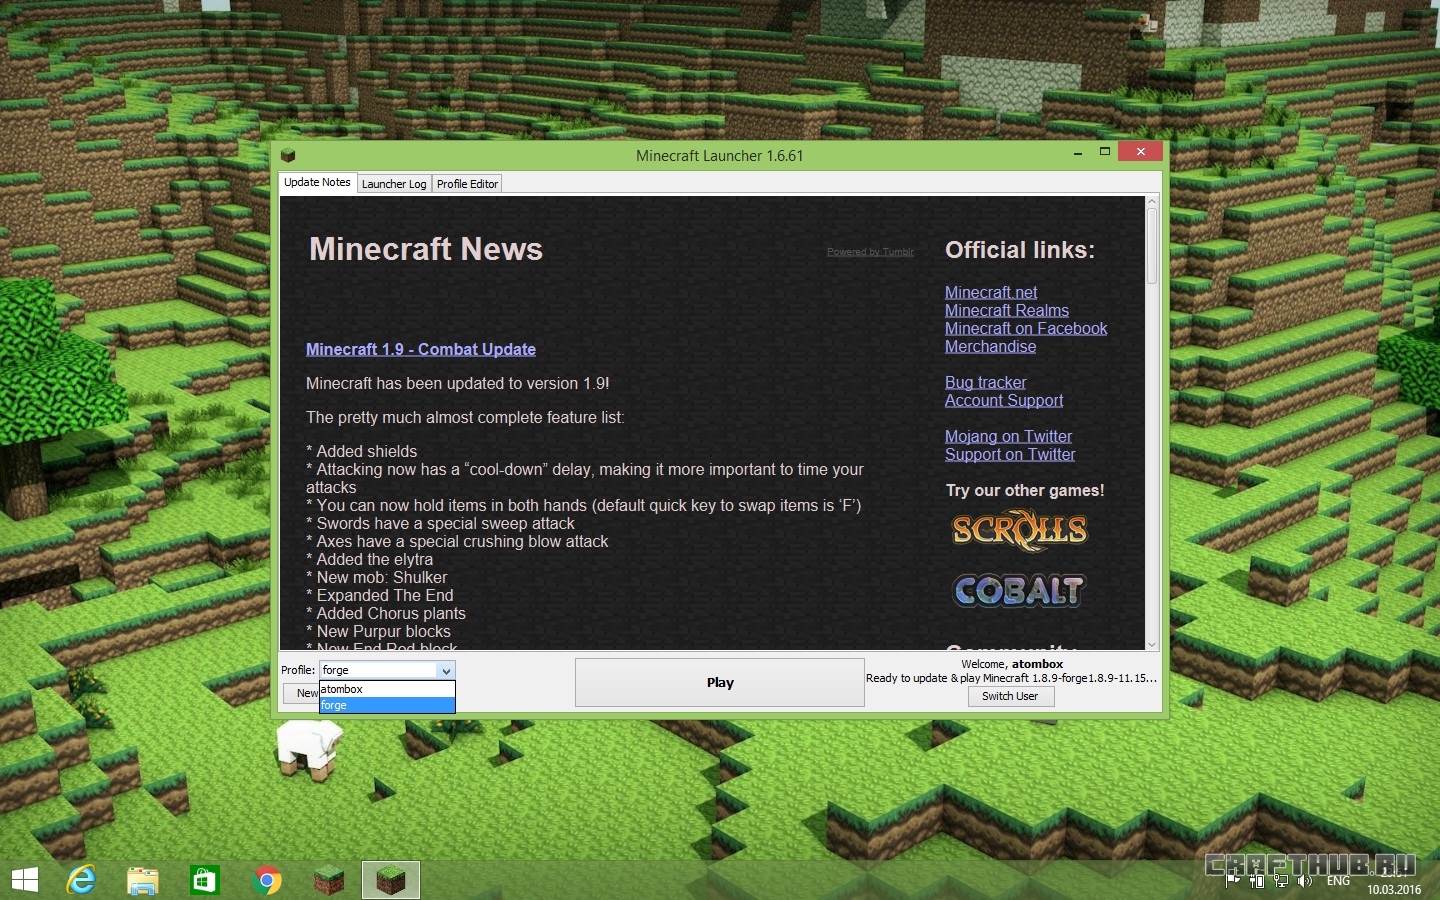 i intalled minecraft forge but it wonnt show up on the launcher